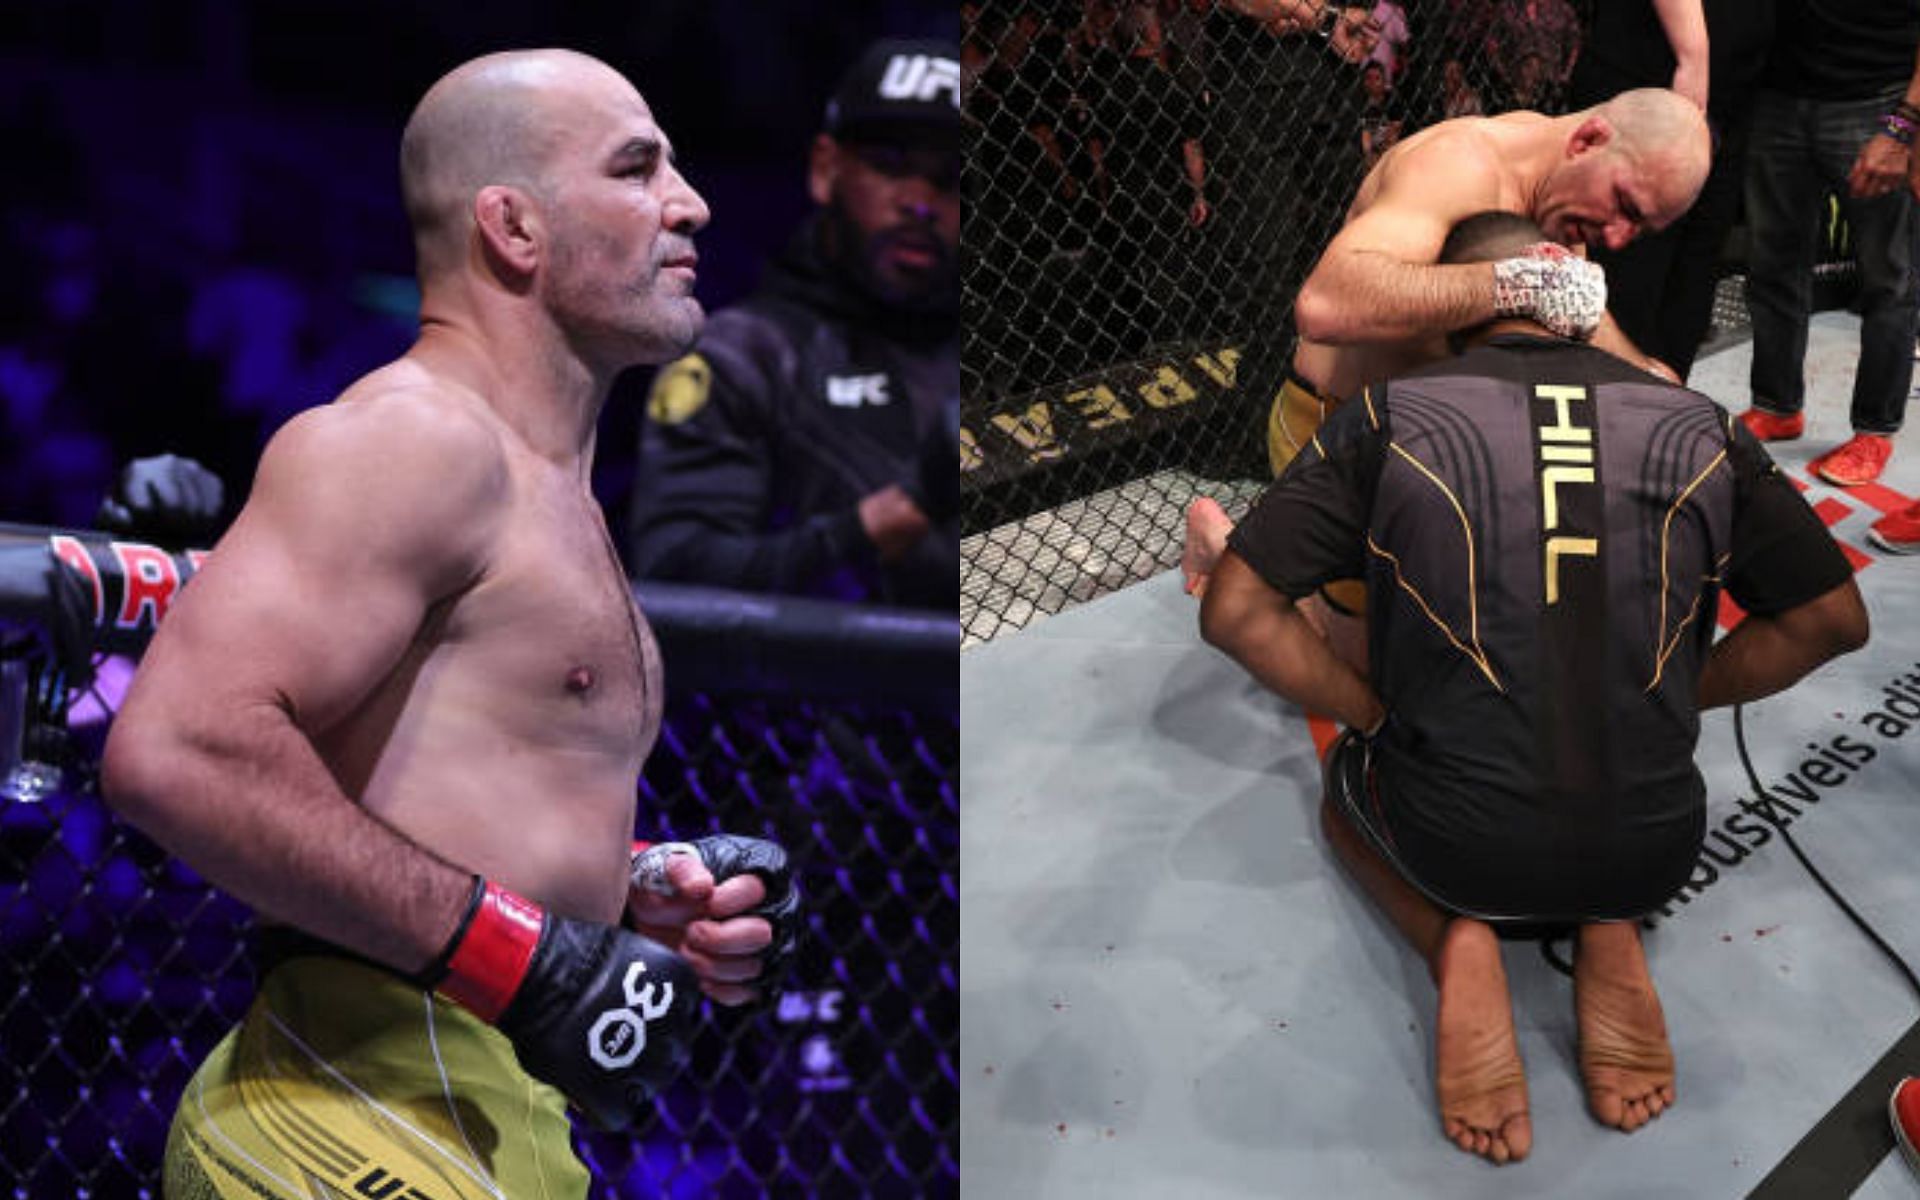 Tributes for Glover Teixeira flood Twitter following his retirement from MMA